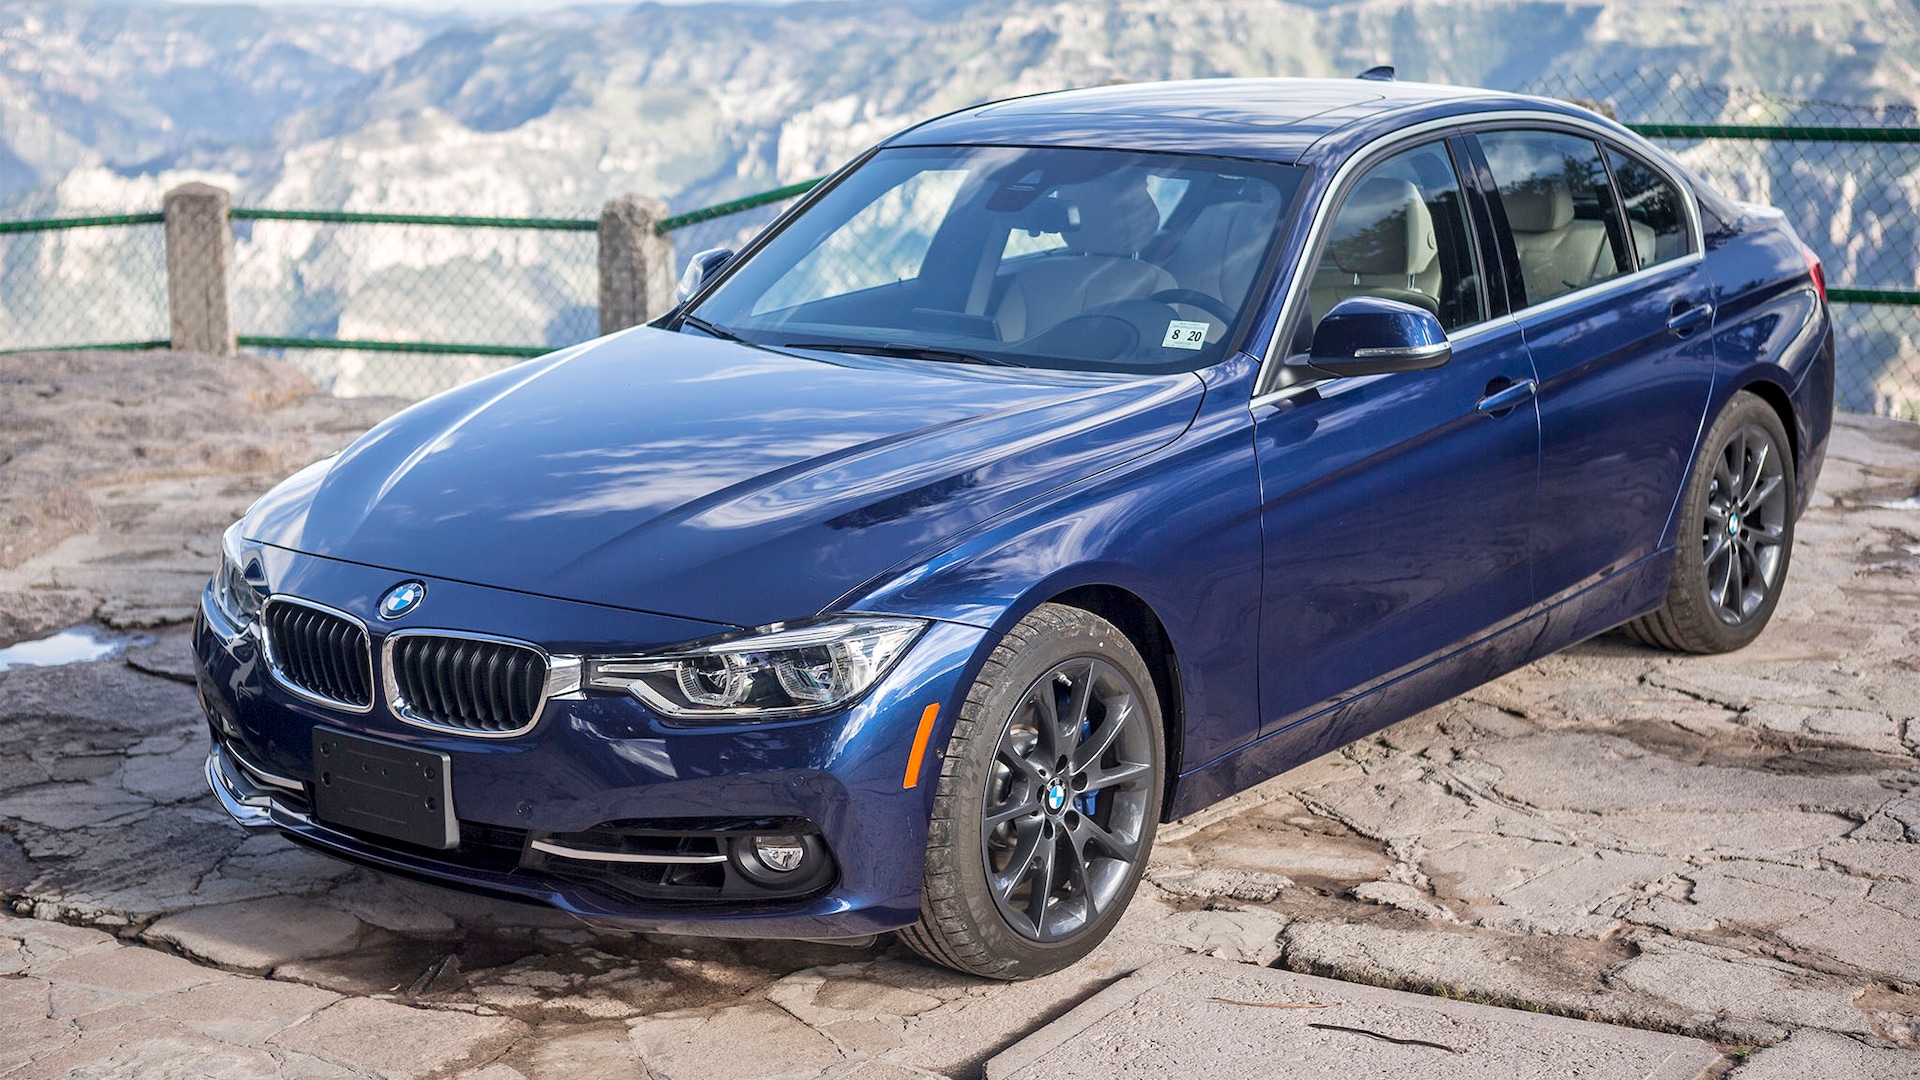 2018 BMW 3-Series Prices, Reviews, and Photos - MotorTrend